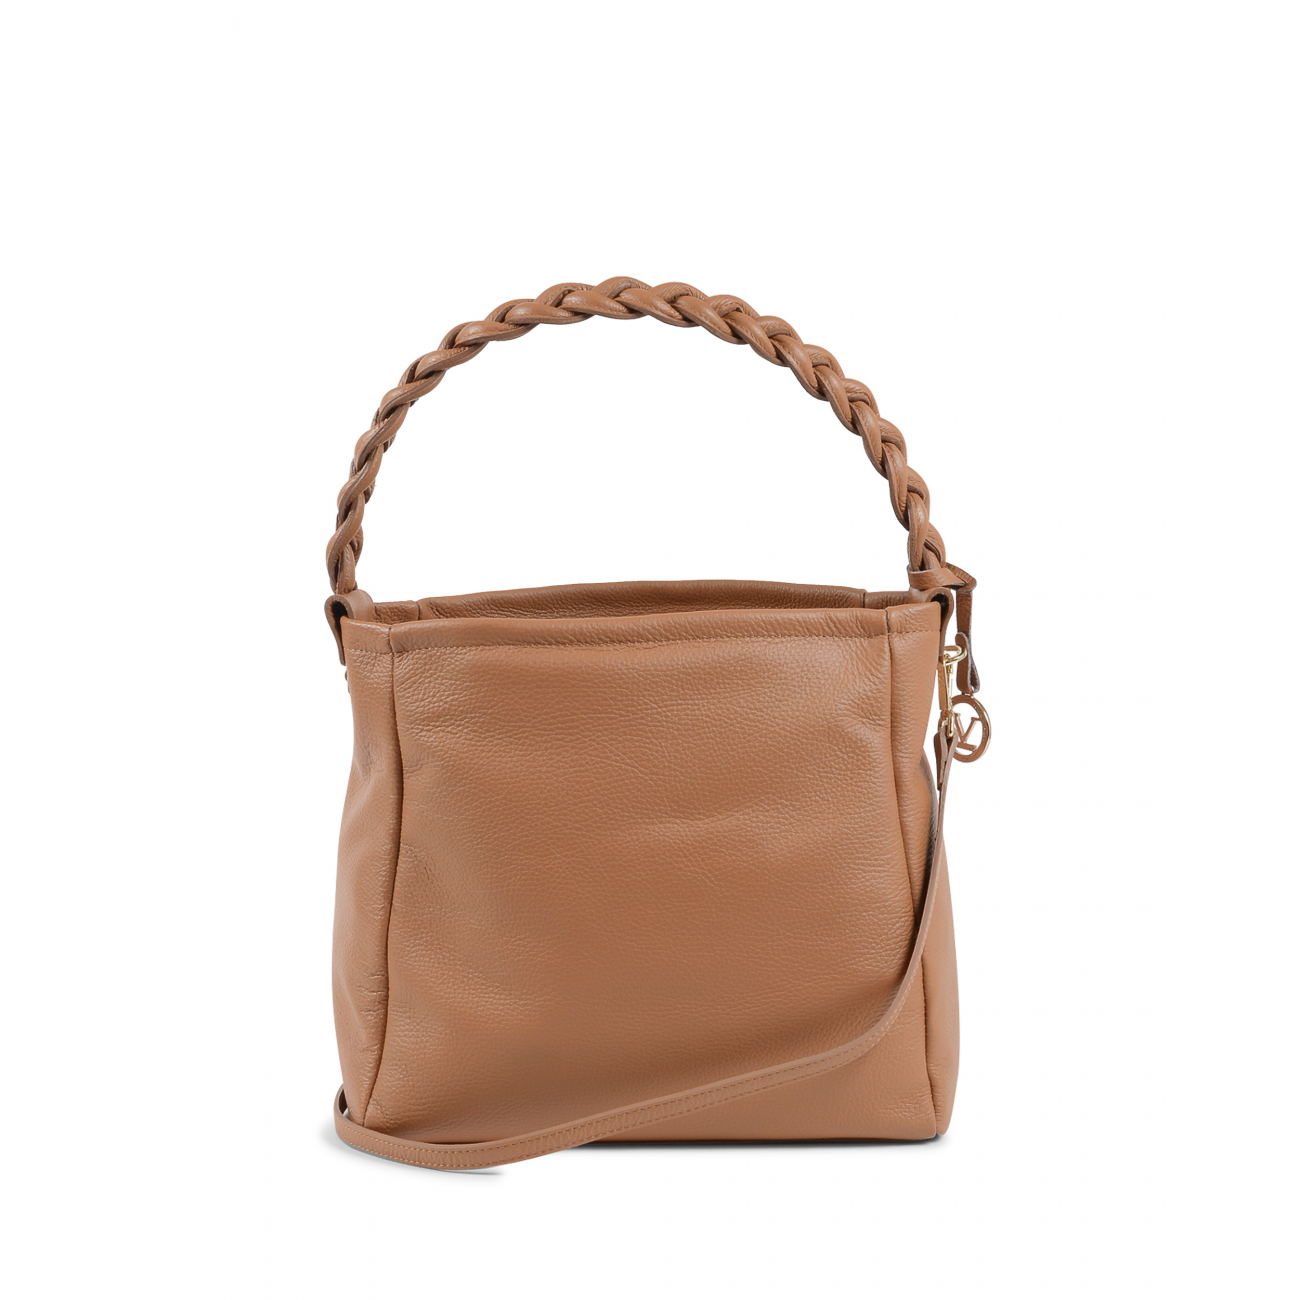 By: 19V69 Italia- Details: VE1633 DOLLARO CUOIO- Color: Tan - Composition: 100% LEATHER - Measures: 33x30x16 cm - Made: ITALY - Season: All Seasons